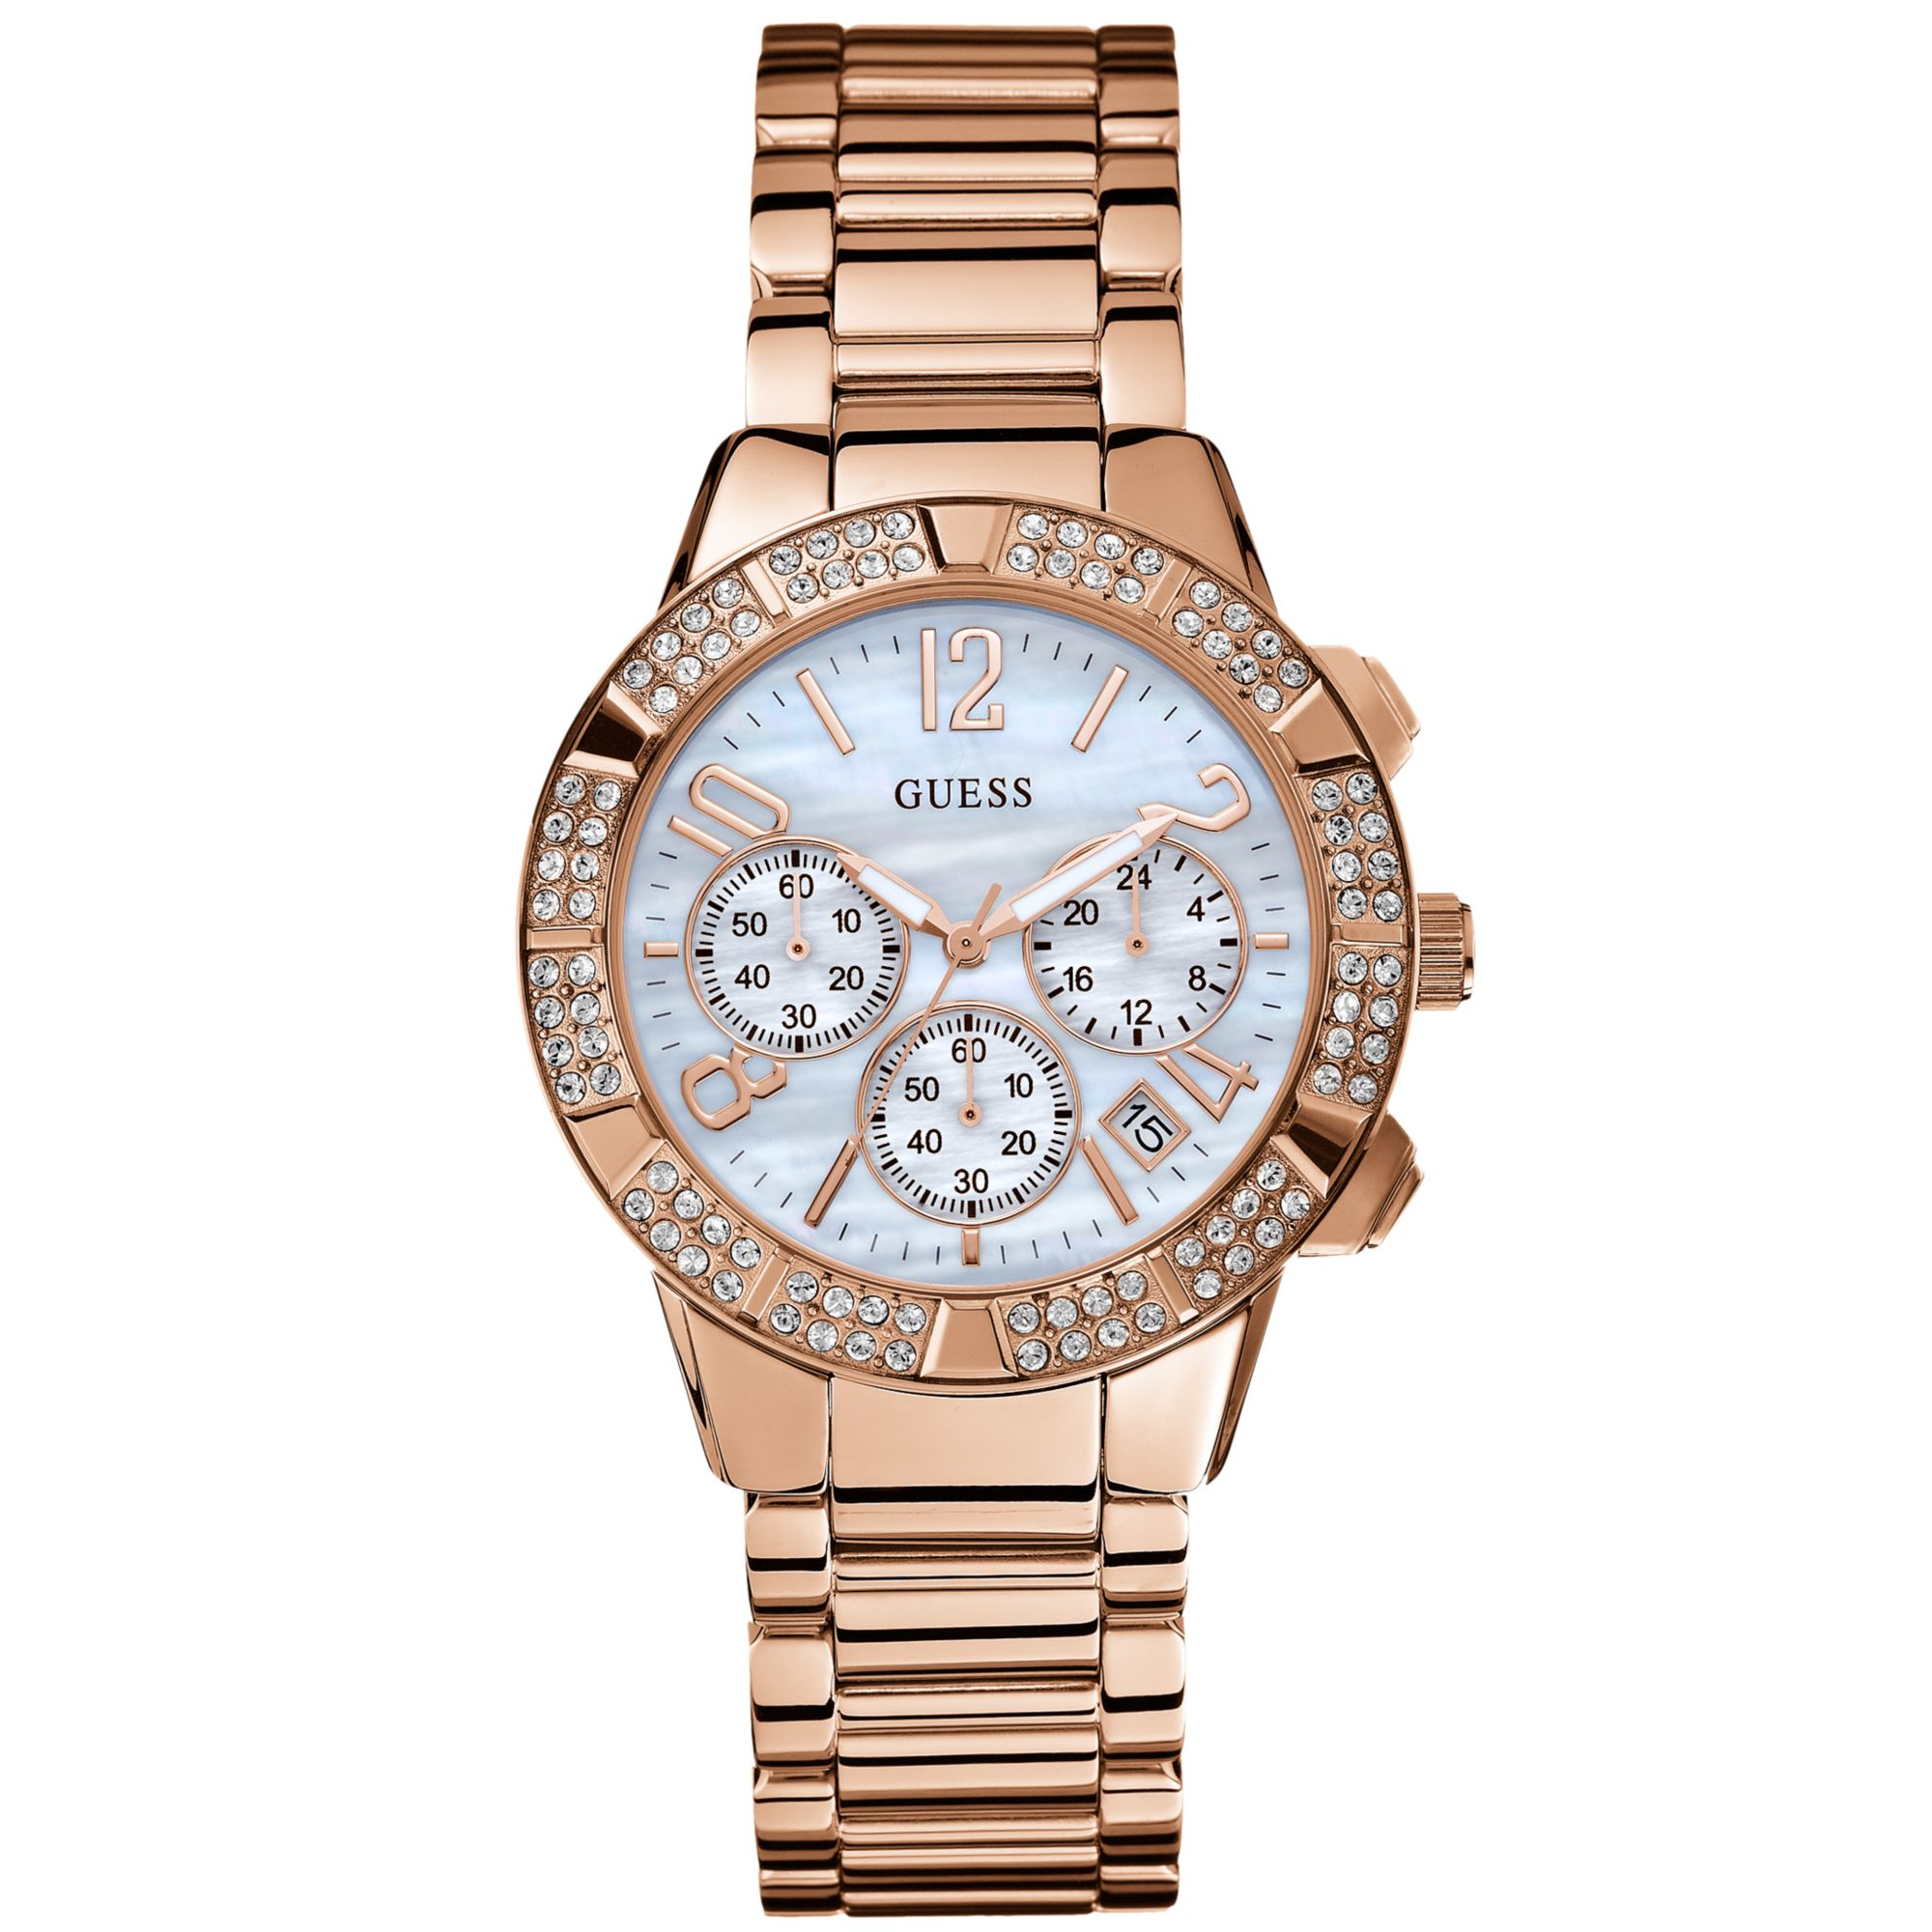 Lyst - Guess Watch Womens Chronograph Rose Gold  announce  